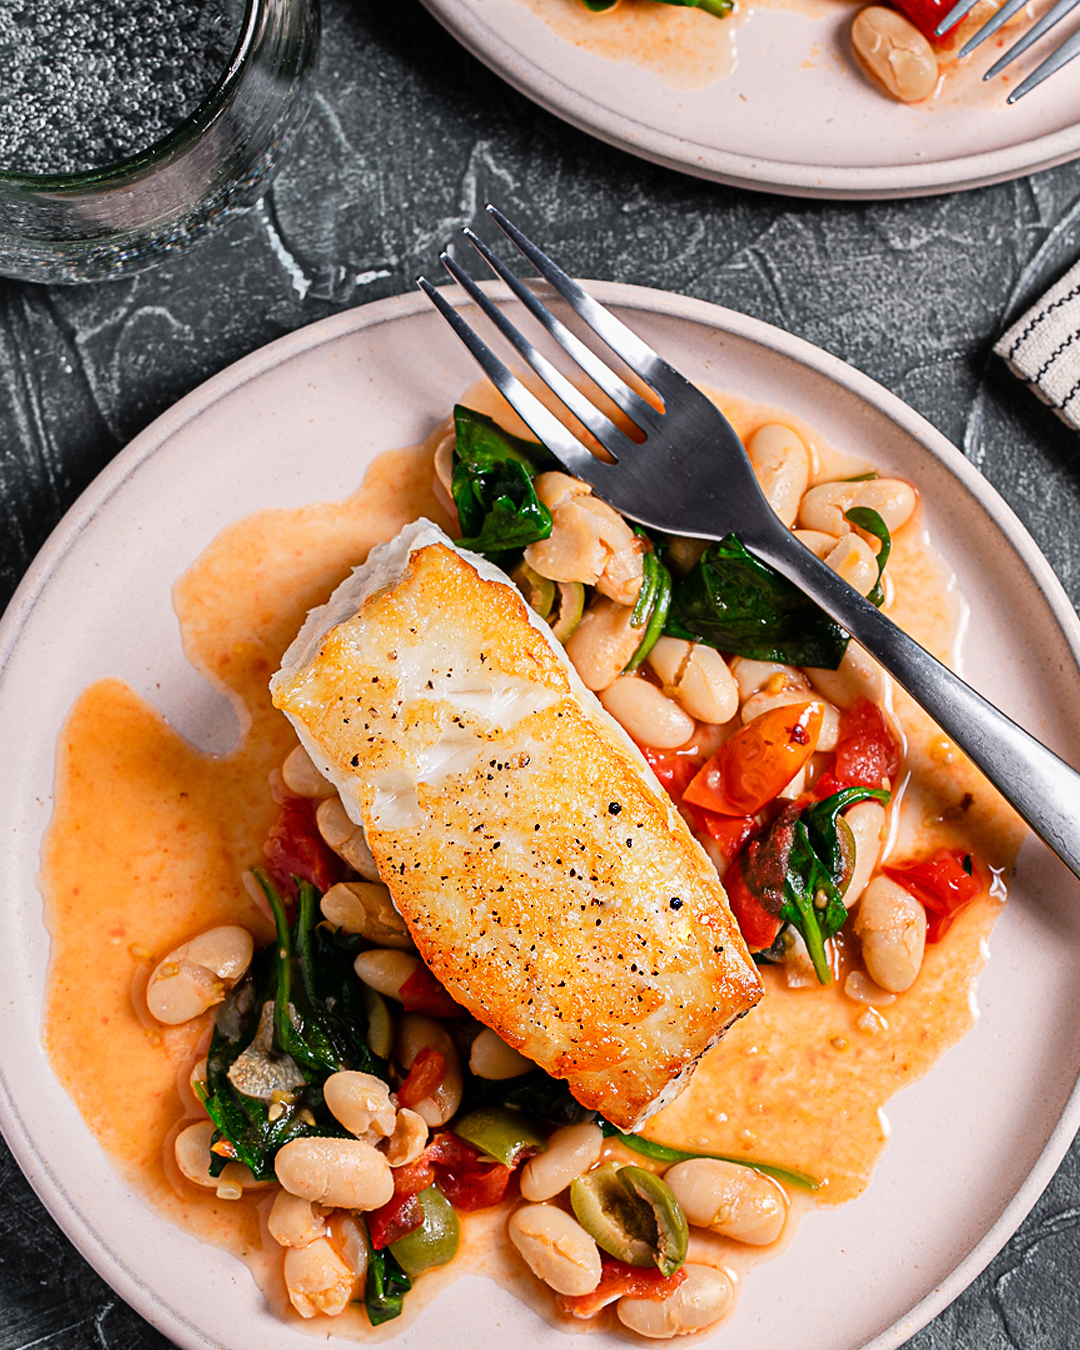 Seared Sea Bass with Lemon-Olive White Beans